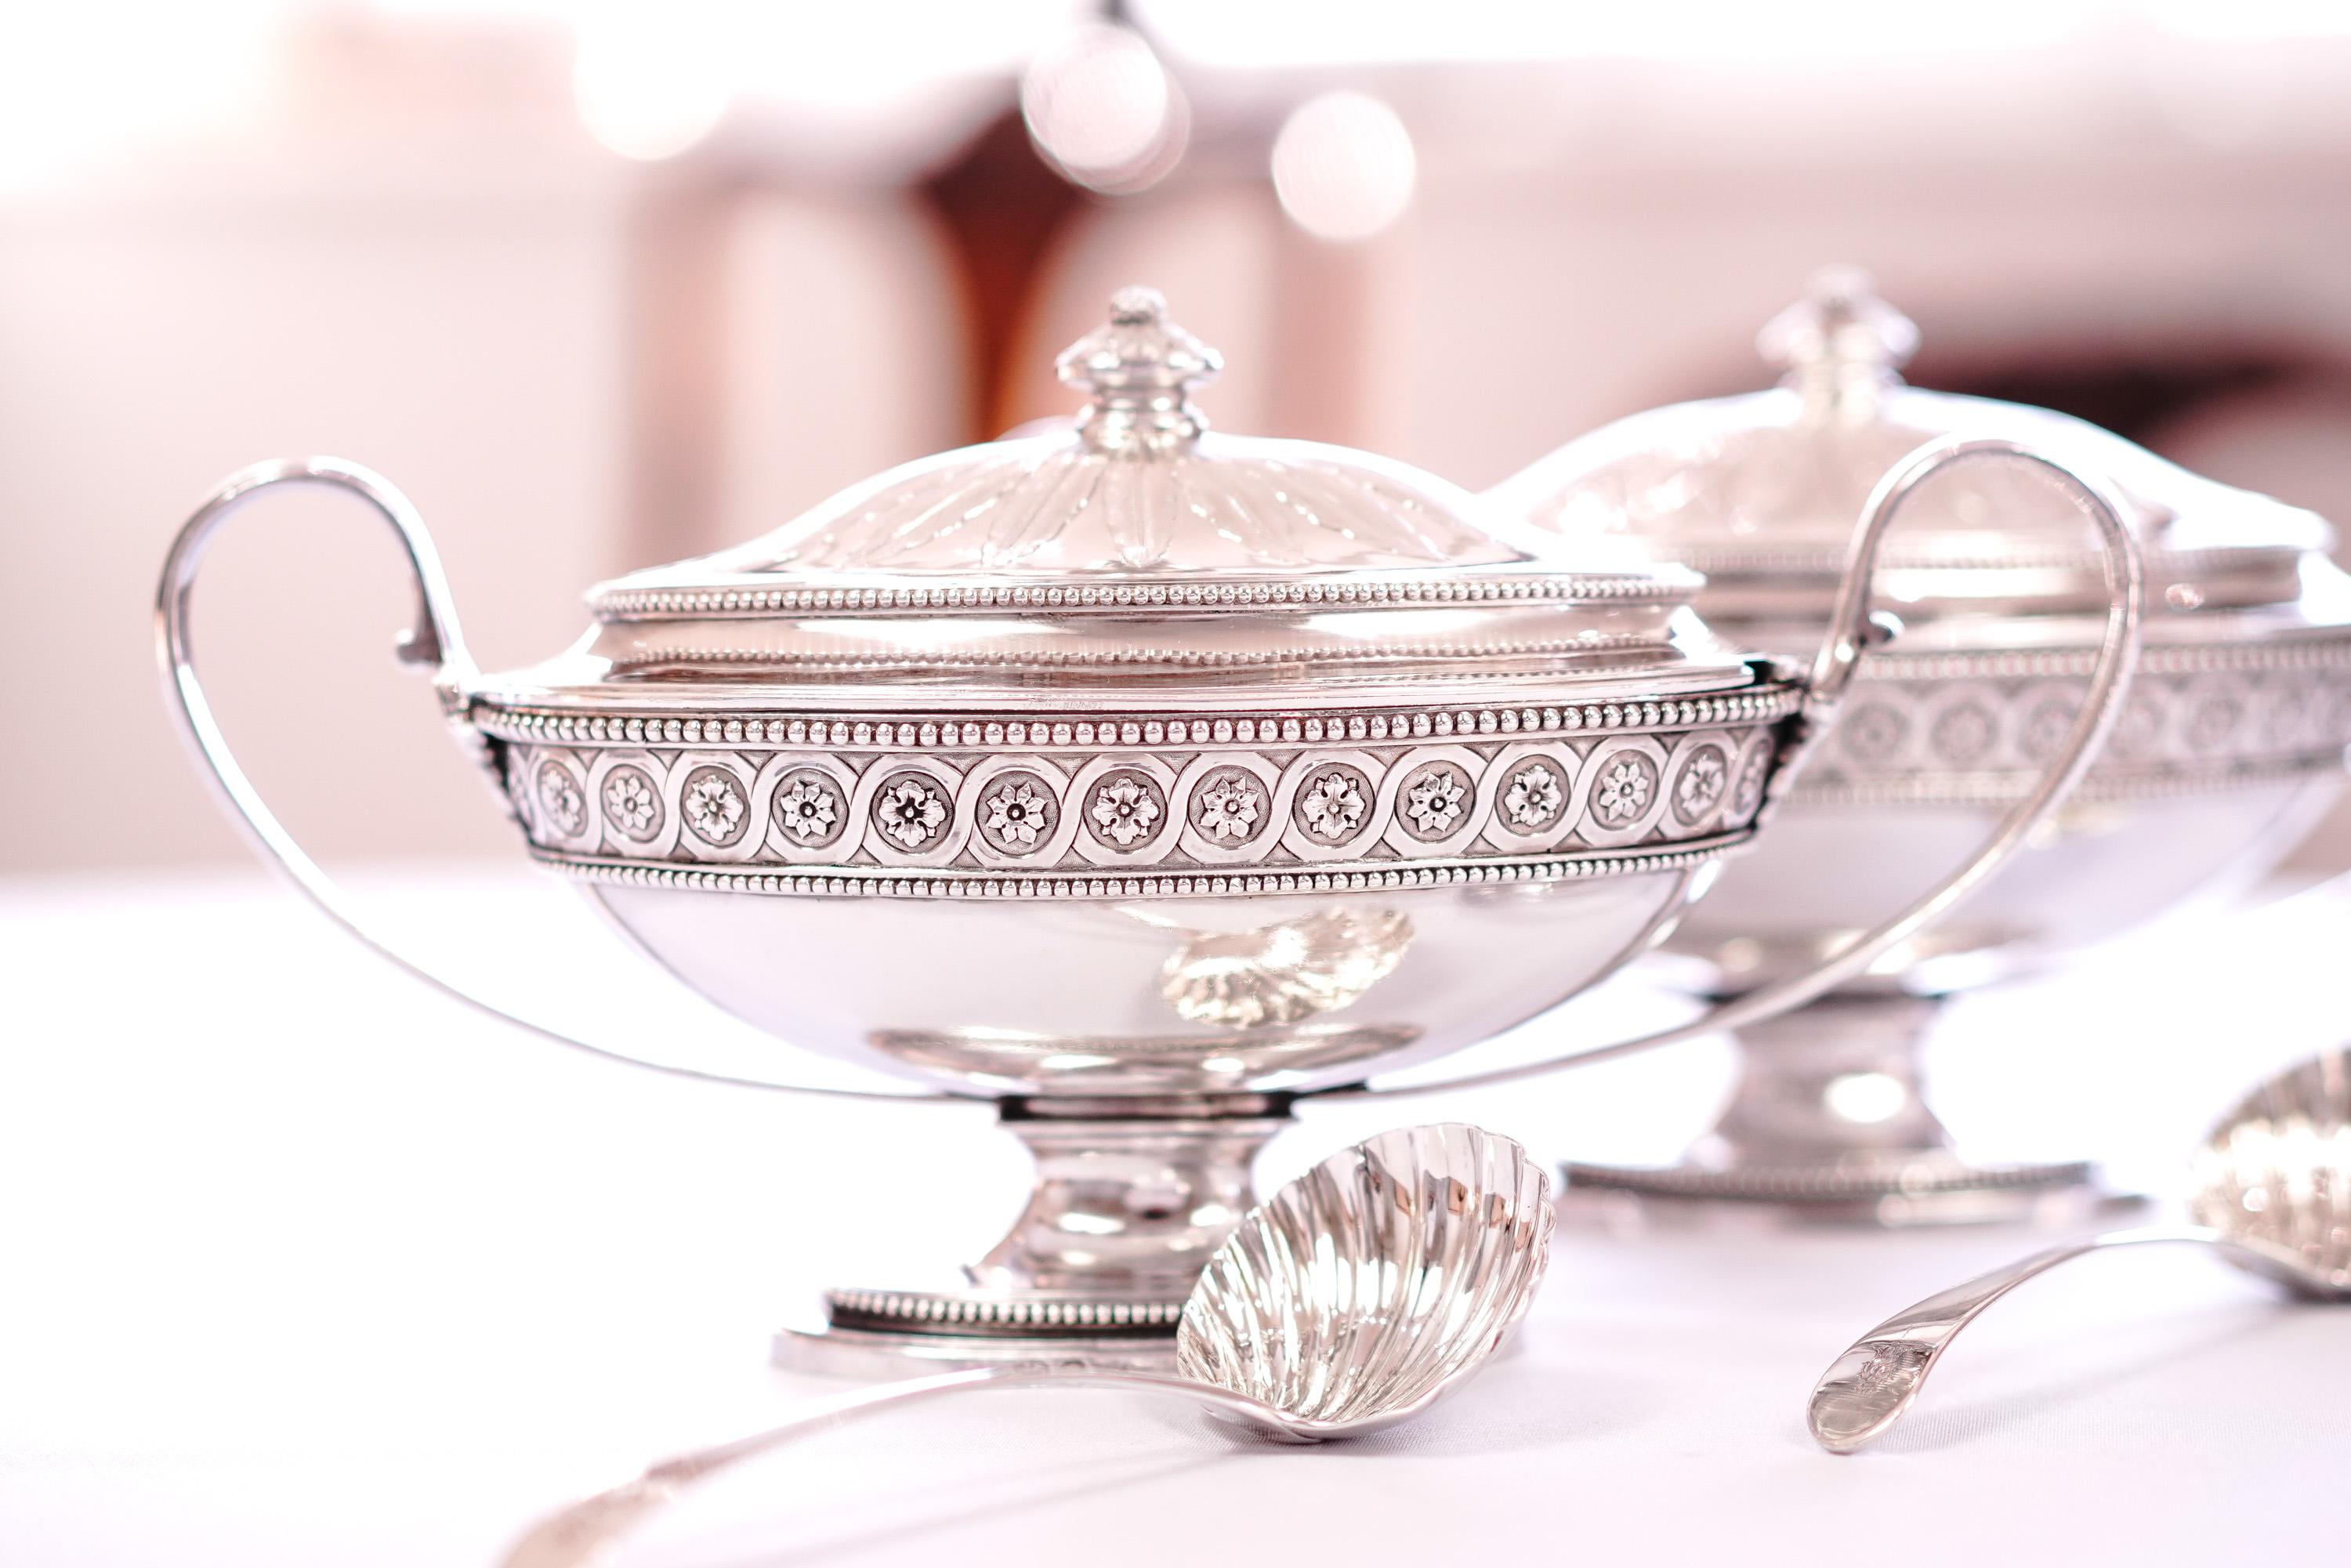 We are delighted to offer this fabulous highly elegant, yet practical, pair of antique Georgian solid sterling silver tureens made in the most fabulous neoclassical design by Benjamin Laver of London in 1782.
 
This pair is particularly elegant and